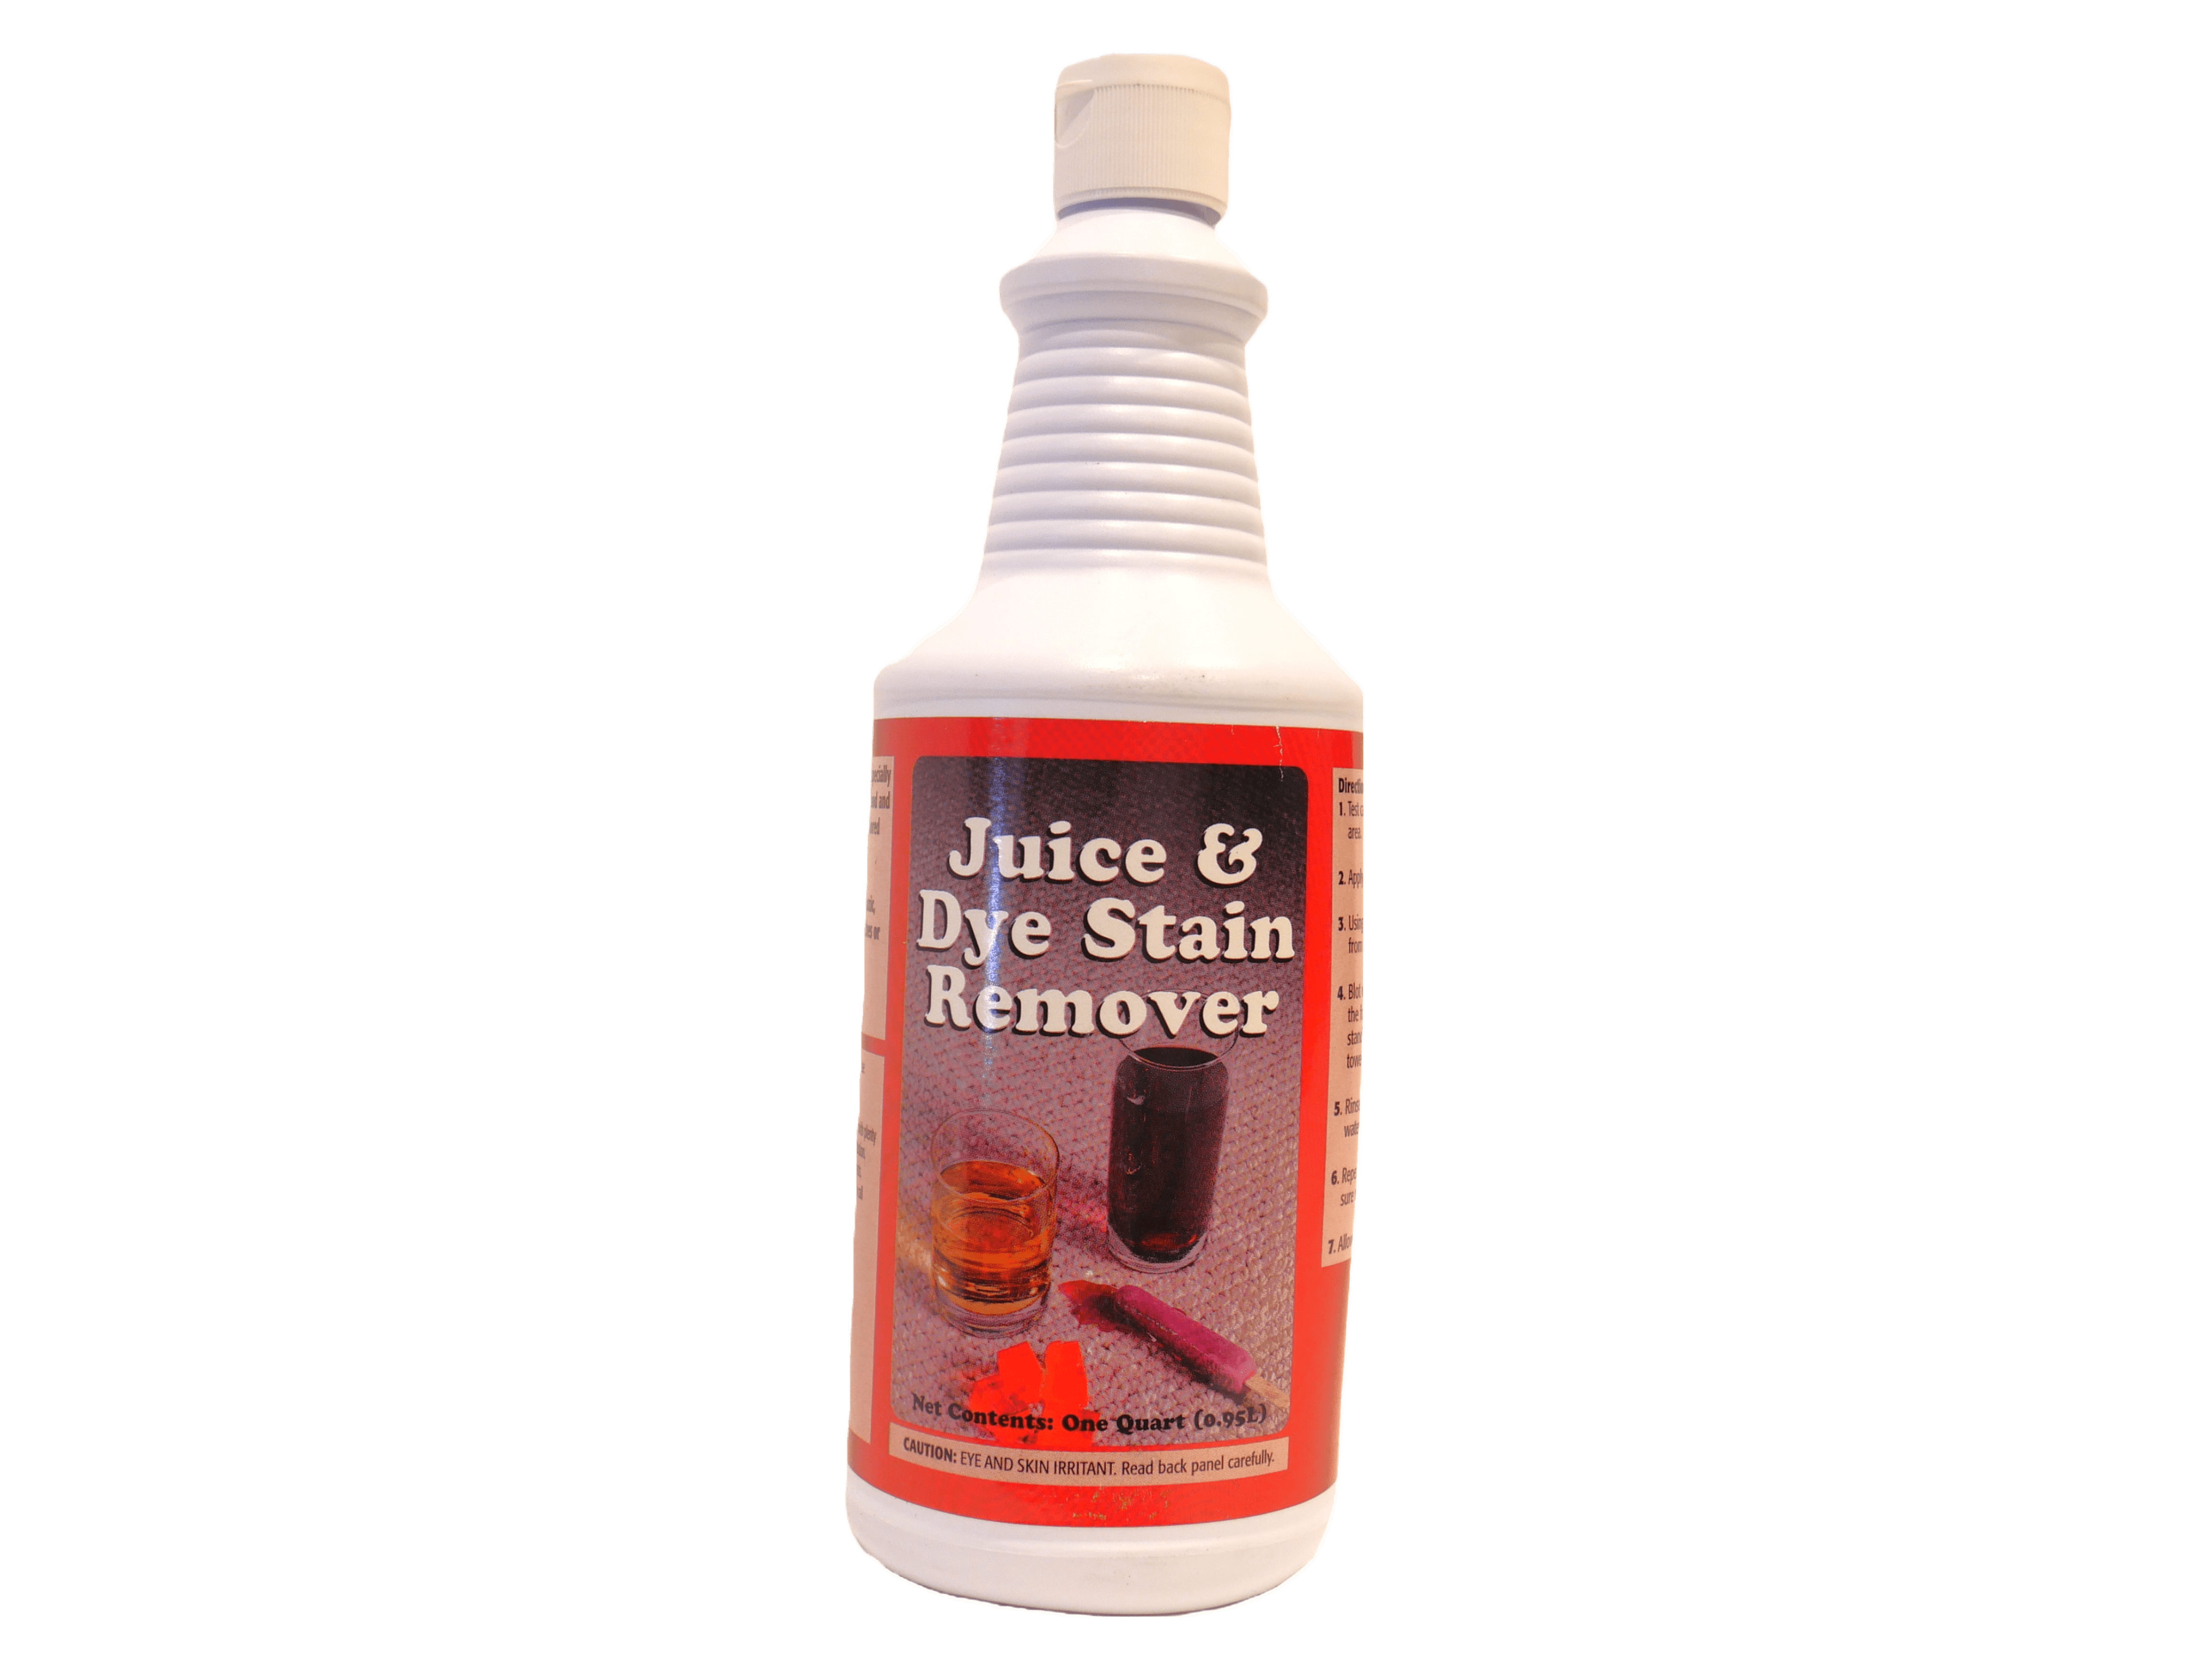 Juice & Dye Stain Remover